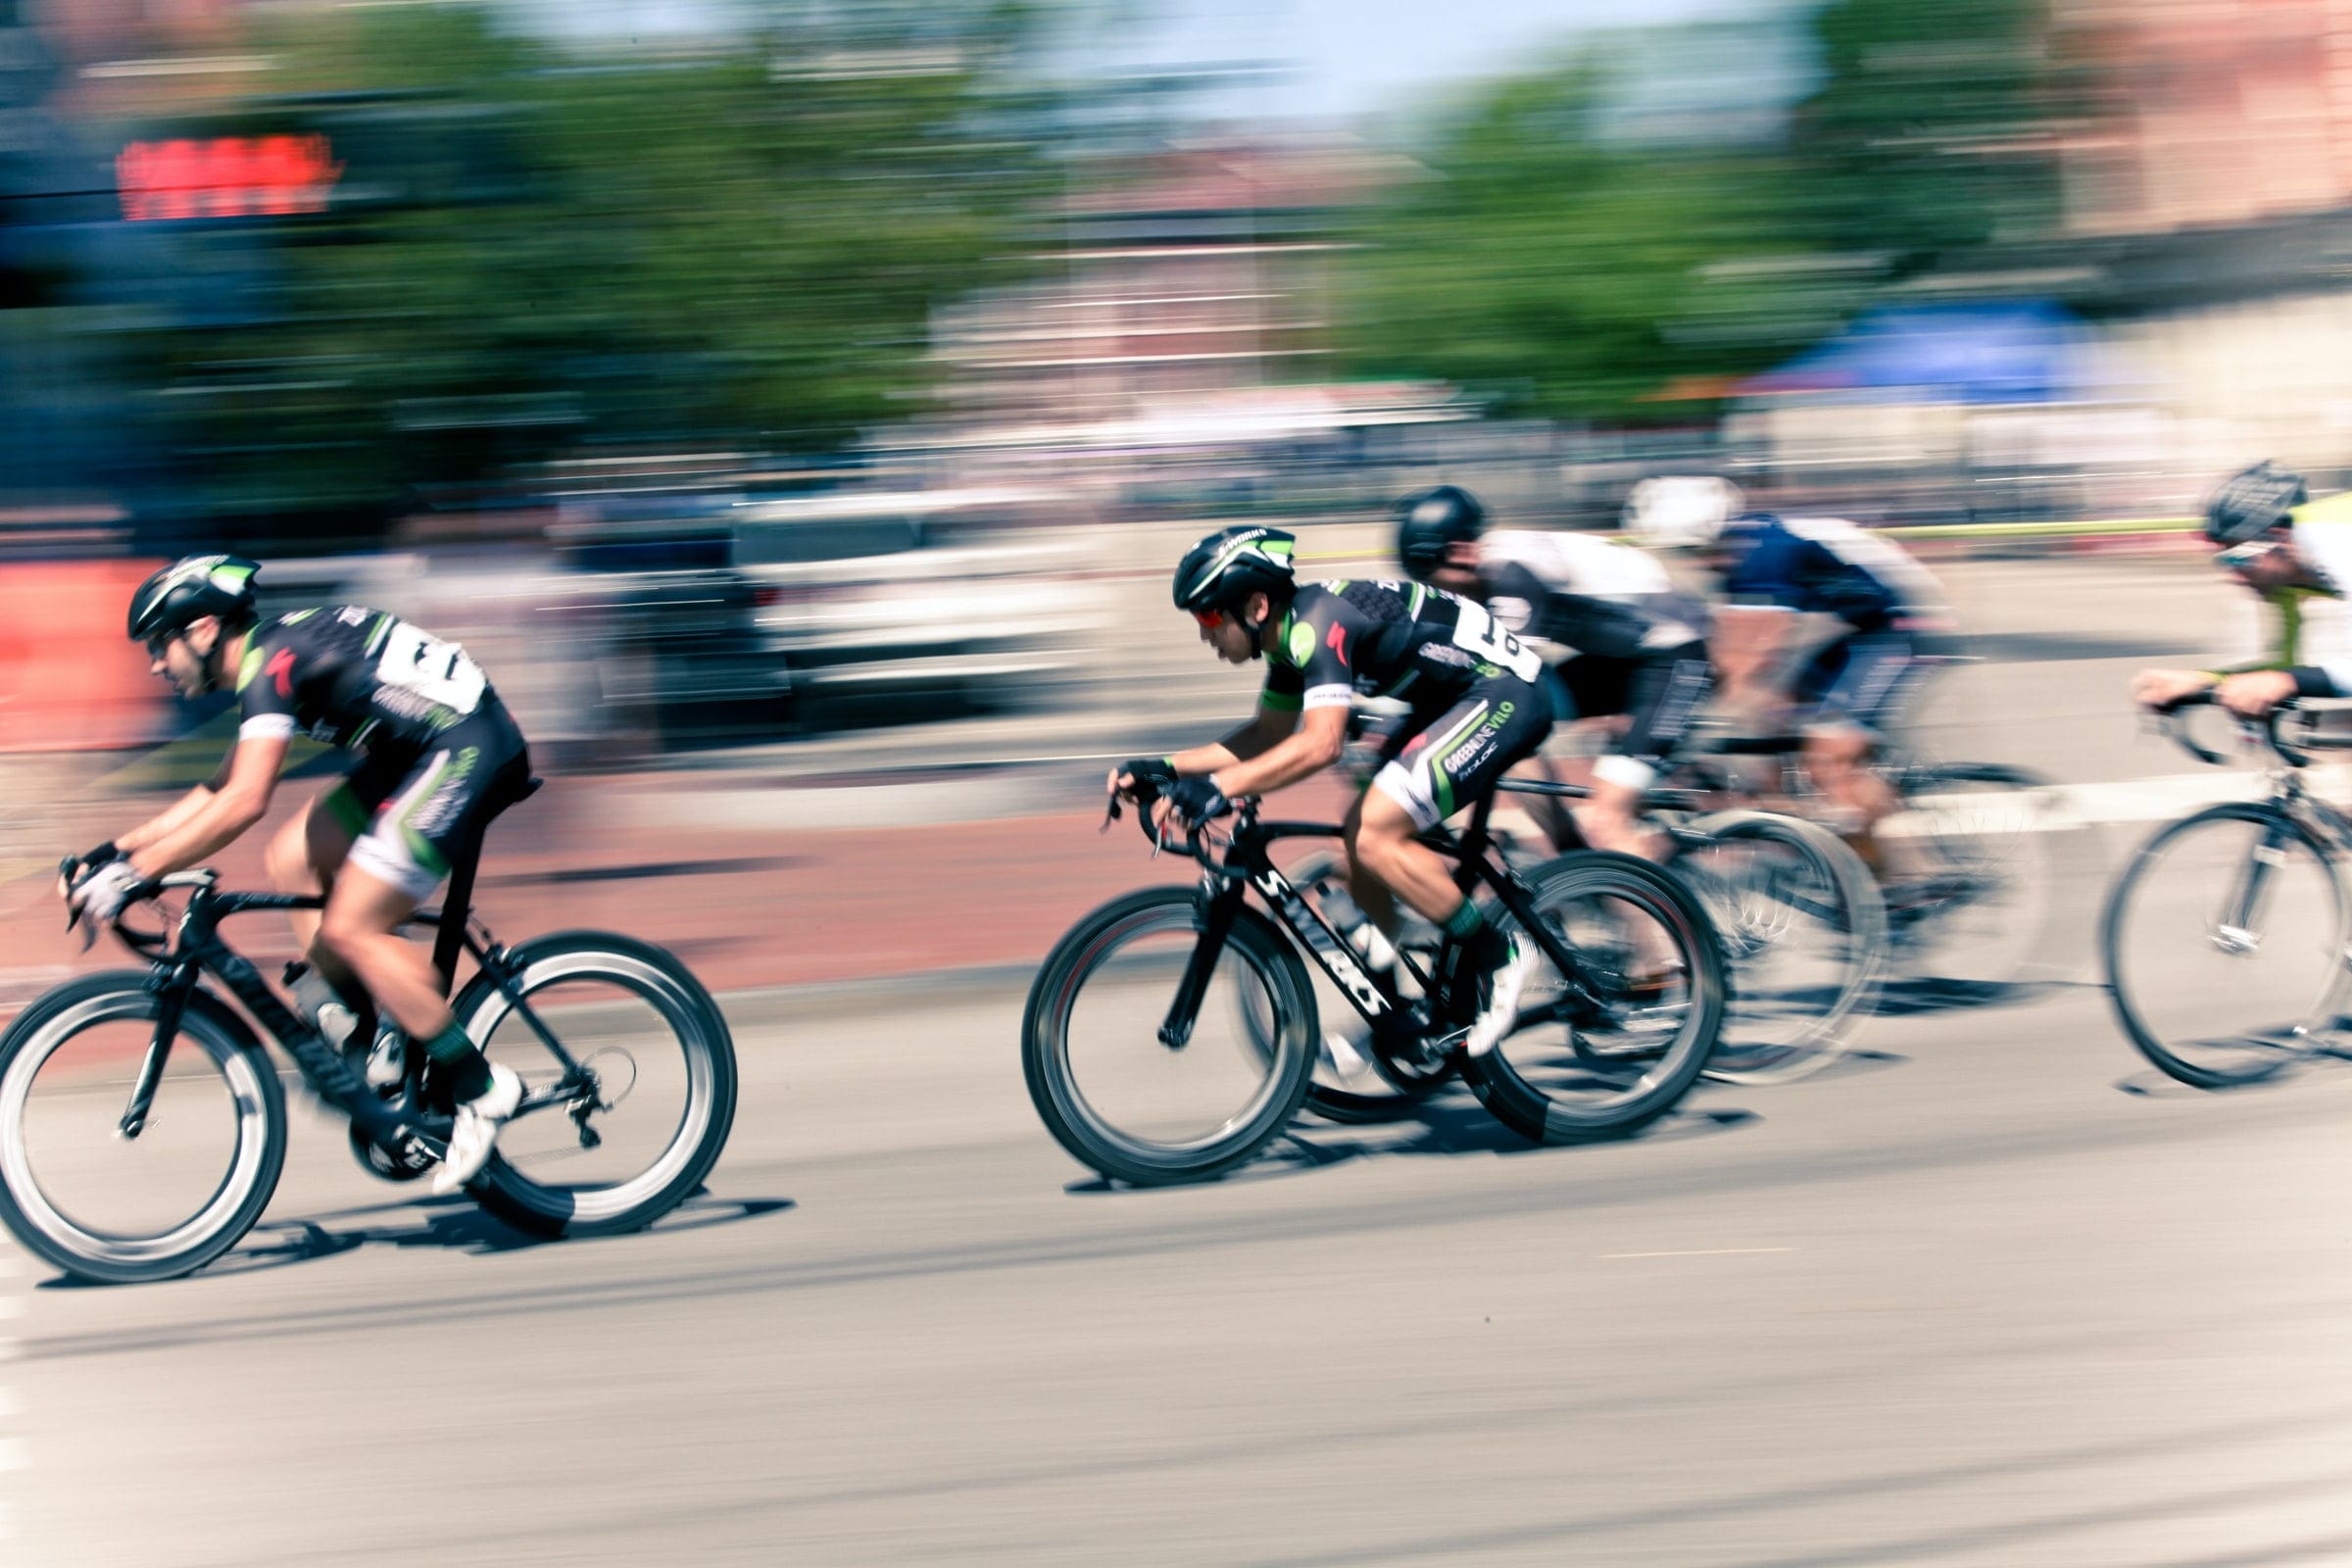 a blurred image of cyclists racing to represent a productive first day back to work